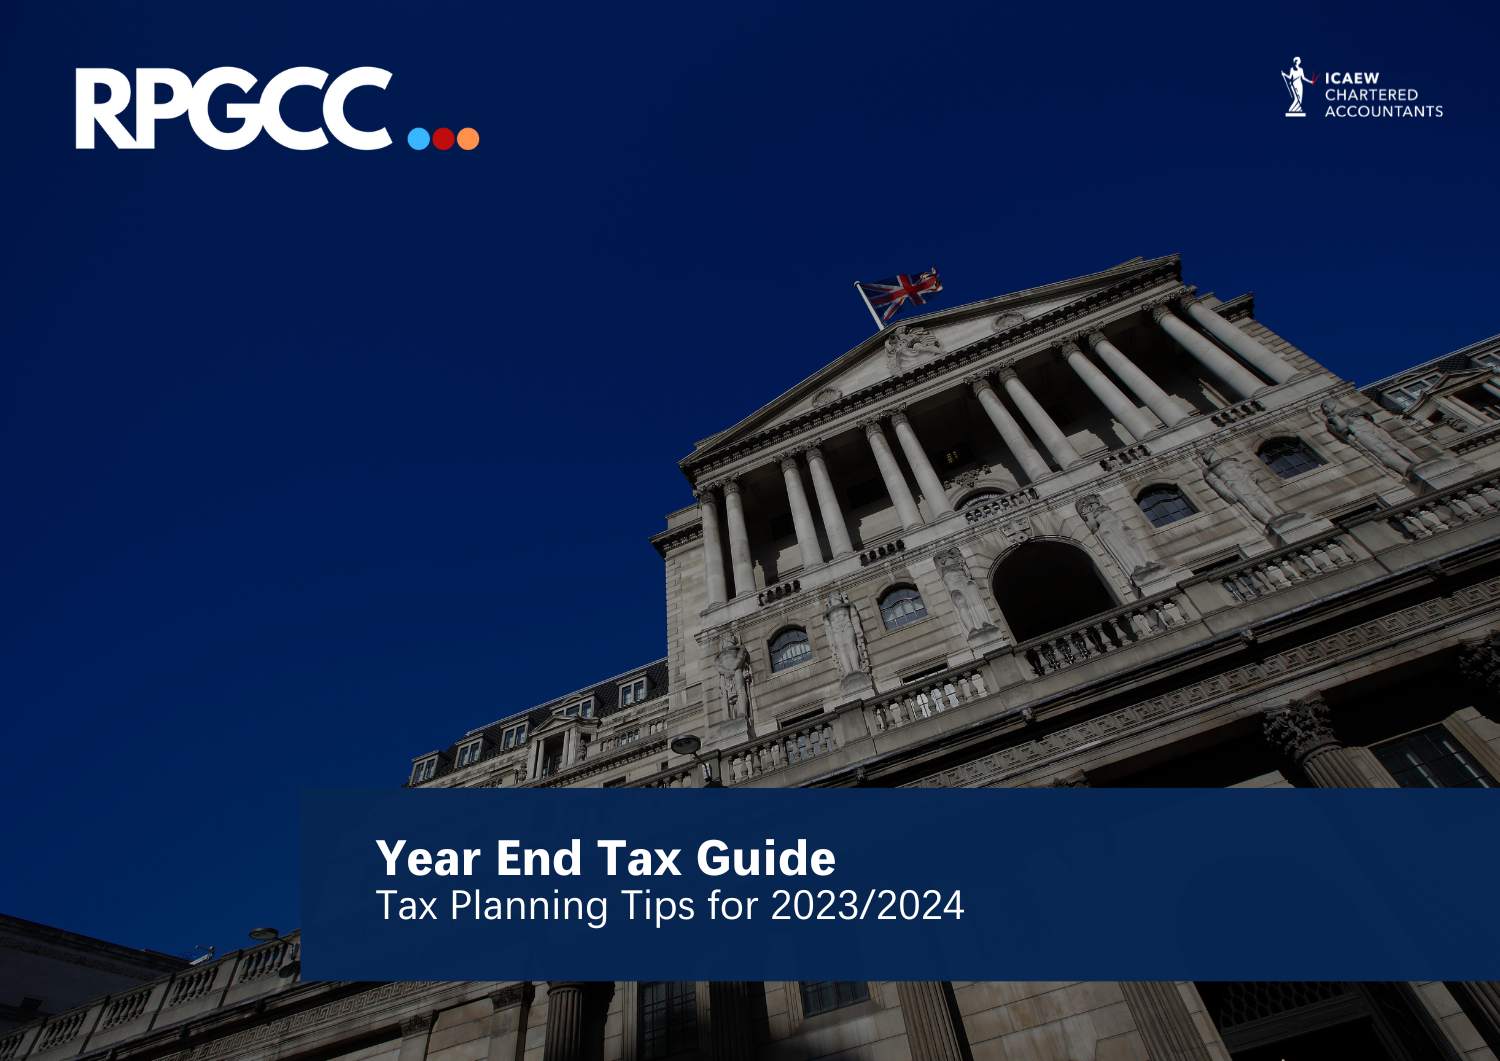 Year-end Tax Guide 2023/2024